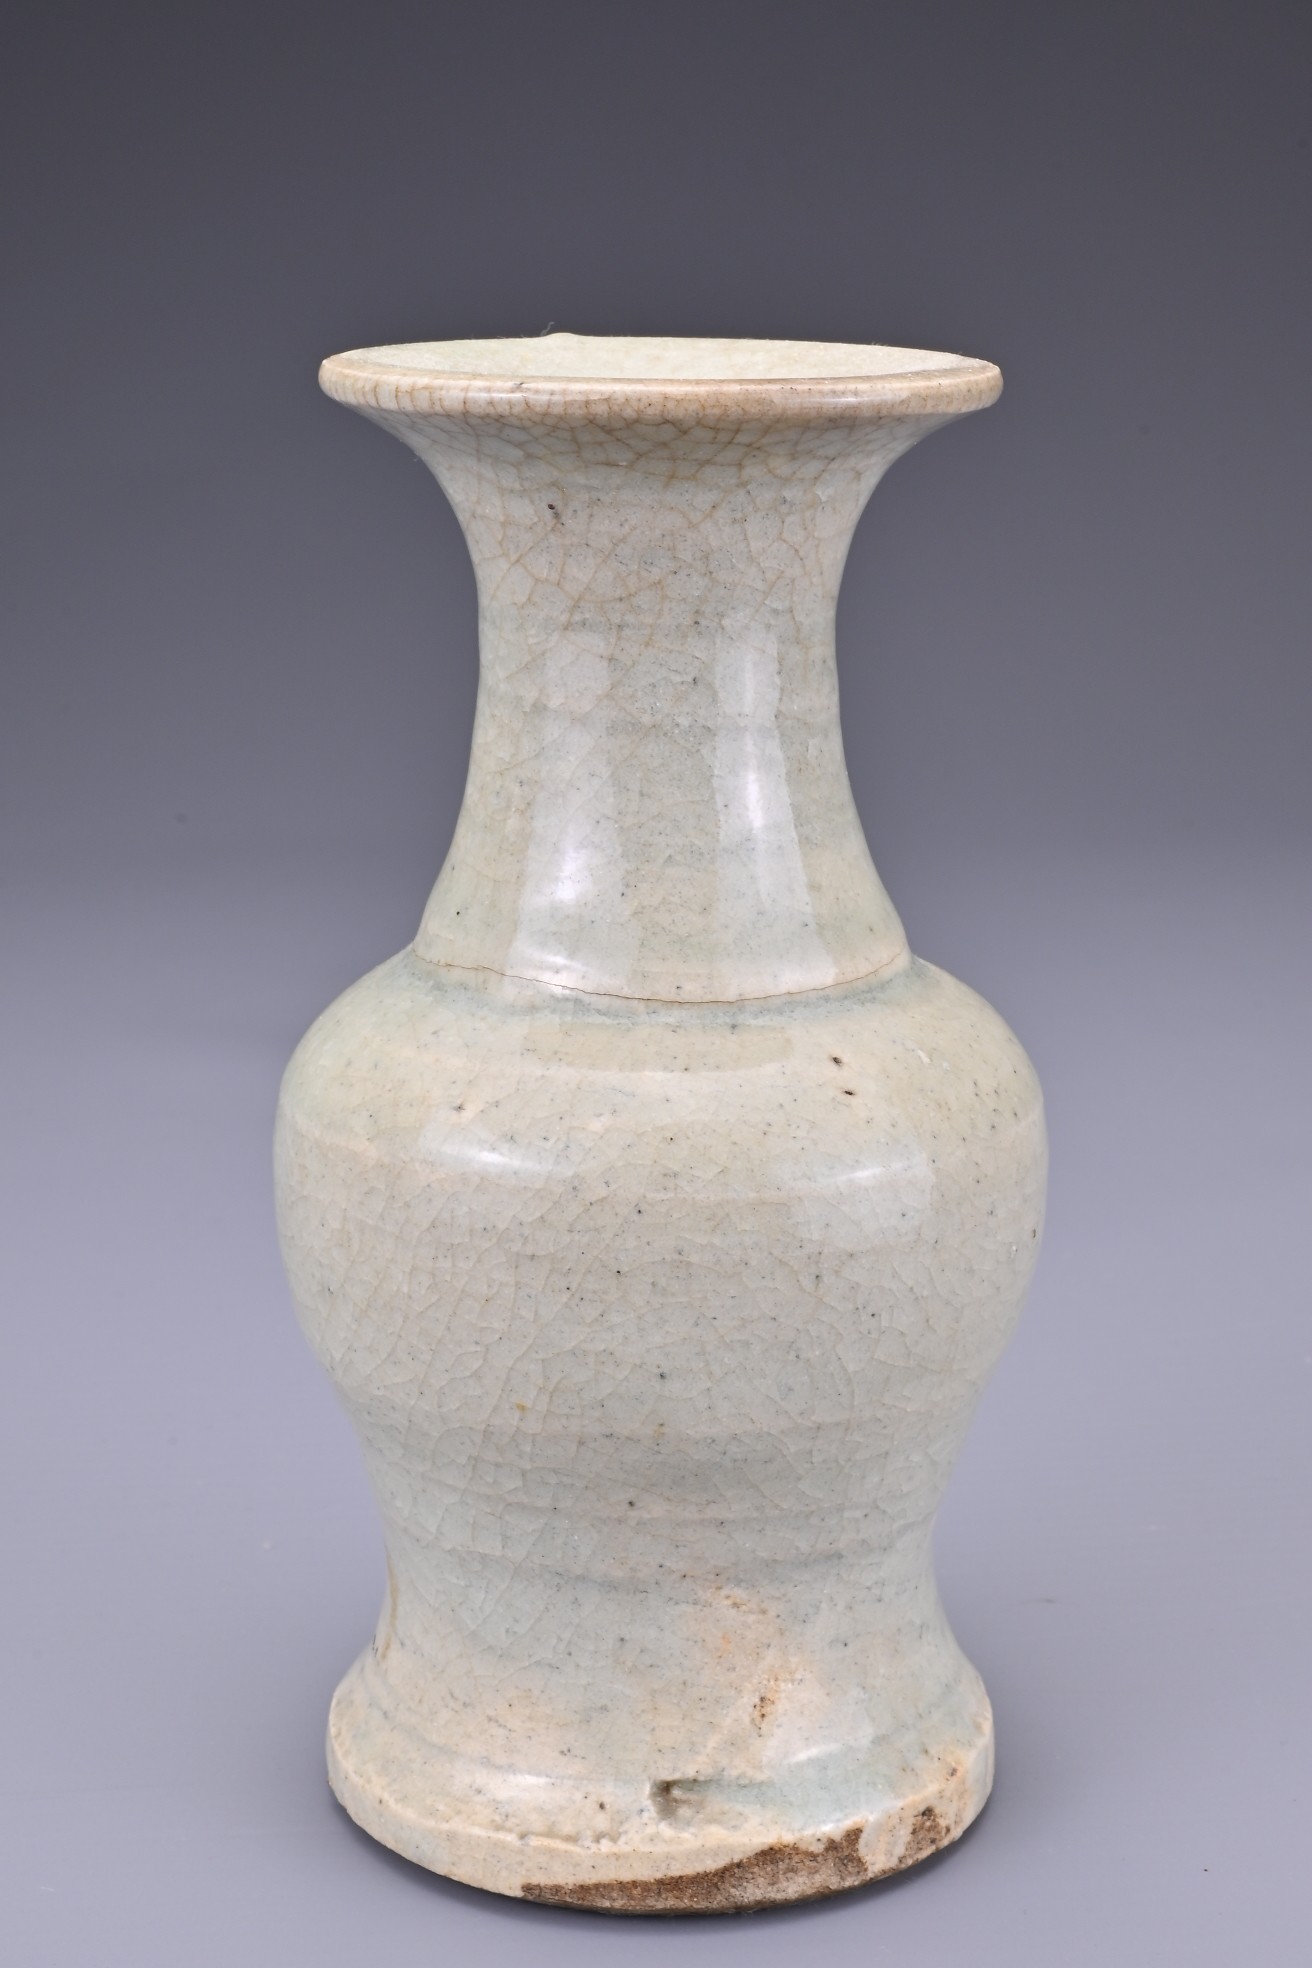 A CHINESE PALE CELADON VASE, LATE MING DYNASTY. Heavily potted with visible crackle throughout. 14. - Image 2 of 7